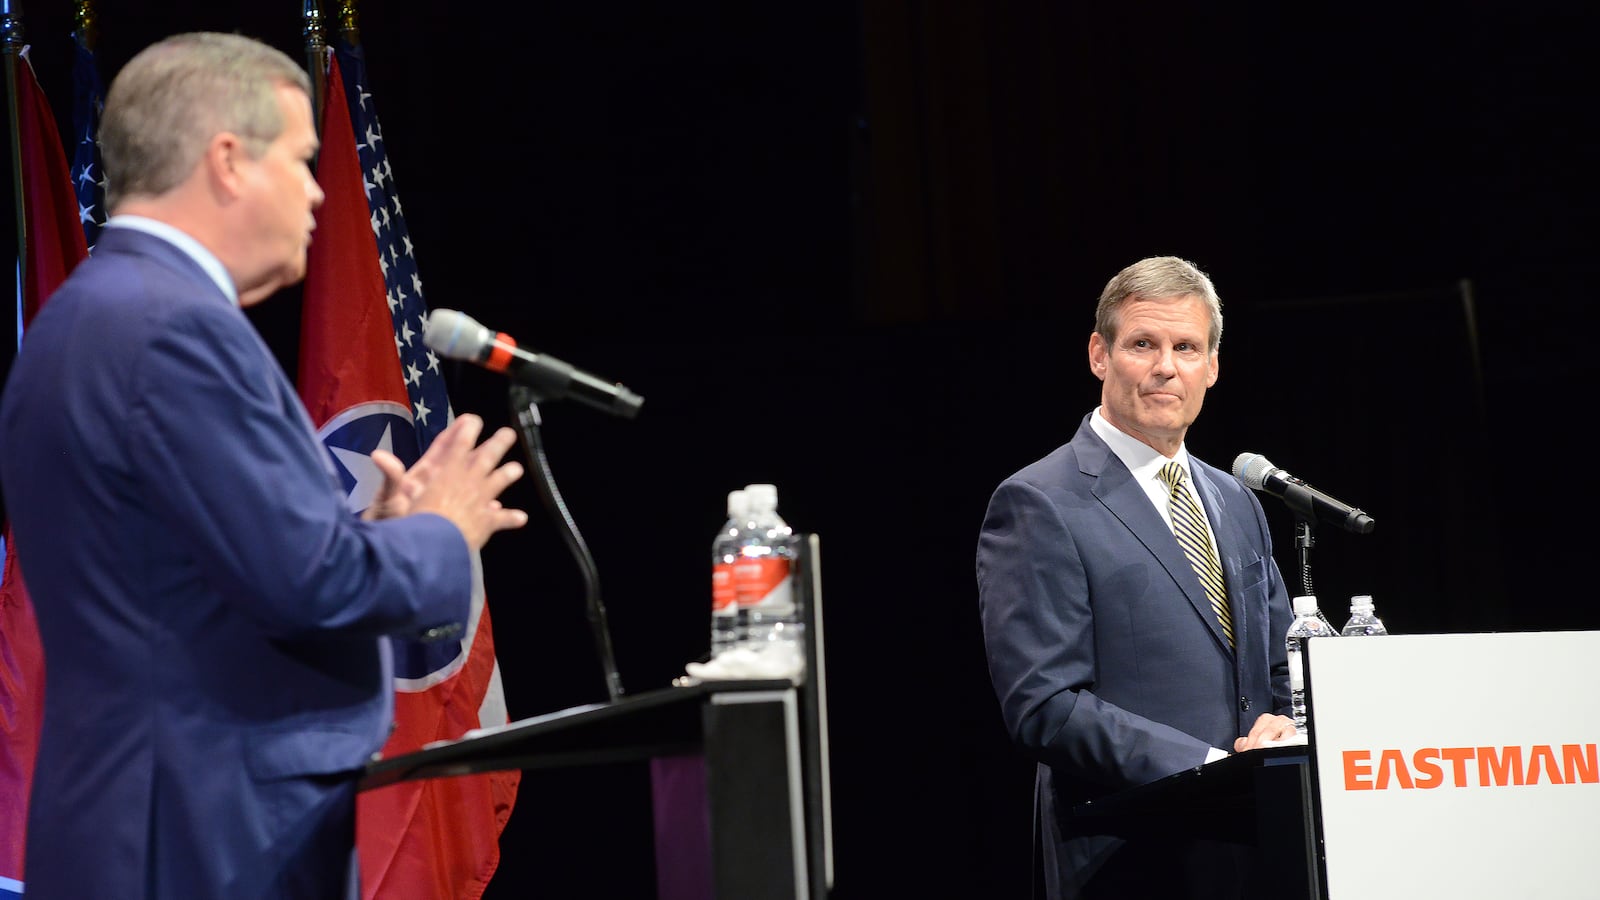 Democrat Karl Dean makes his point as Republican Bill Lee listens during their Oct. 9 gubernatorial debate in Kingsport. The candidates' third and final debate will be on Oct. 12 in Nashville.